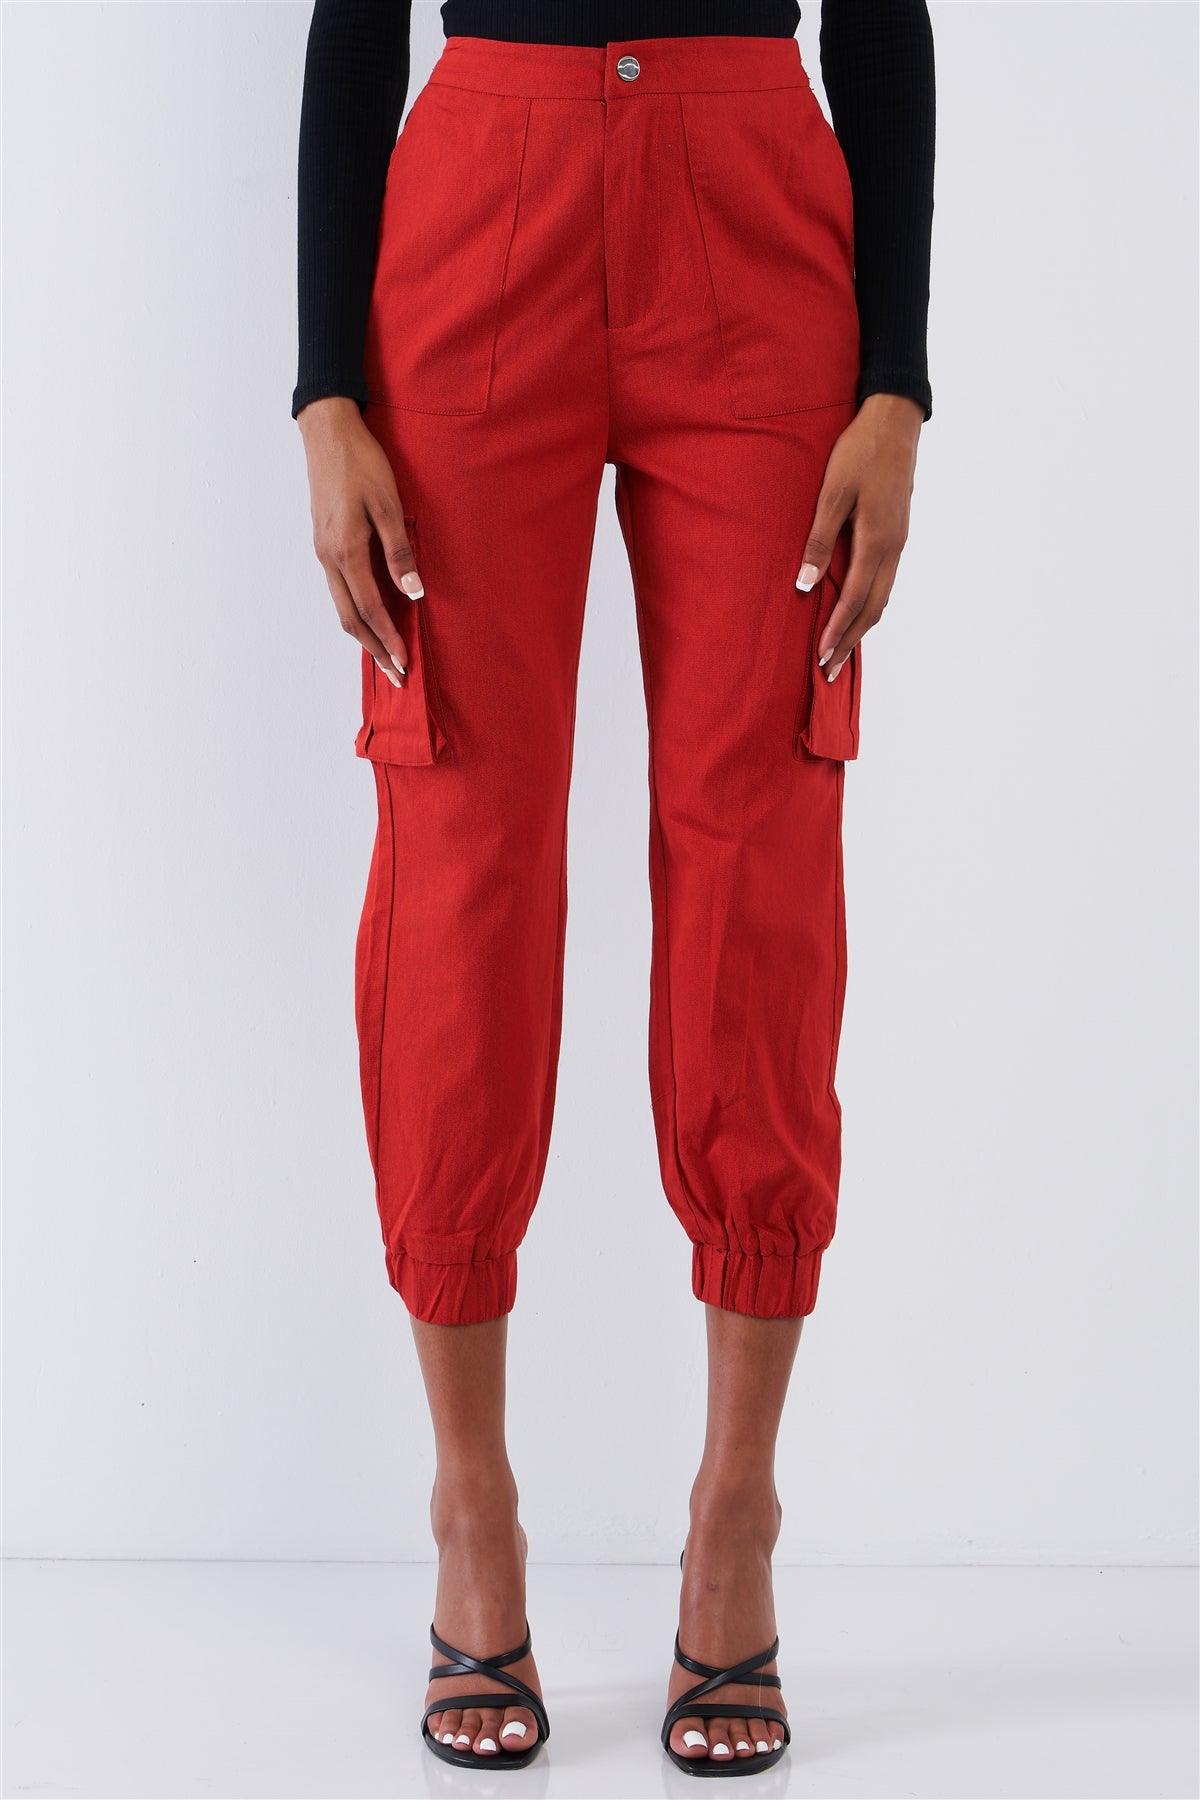 Cherry Red High Waisted Cargo Pocket Jogger Pants /2-2-2